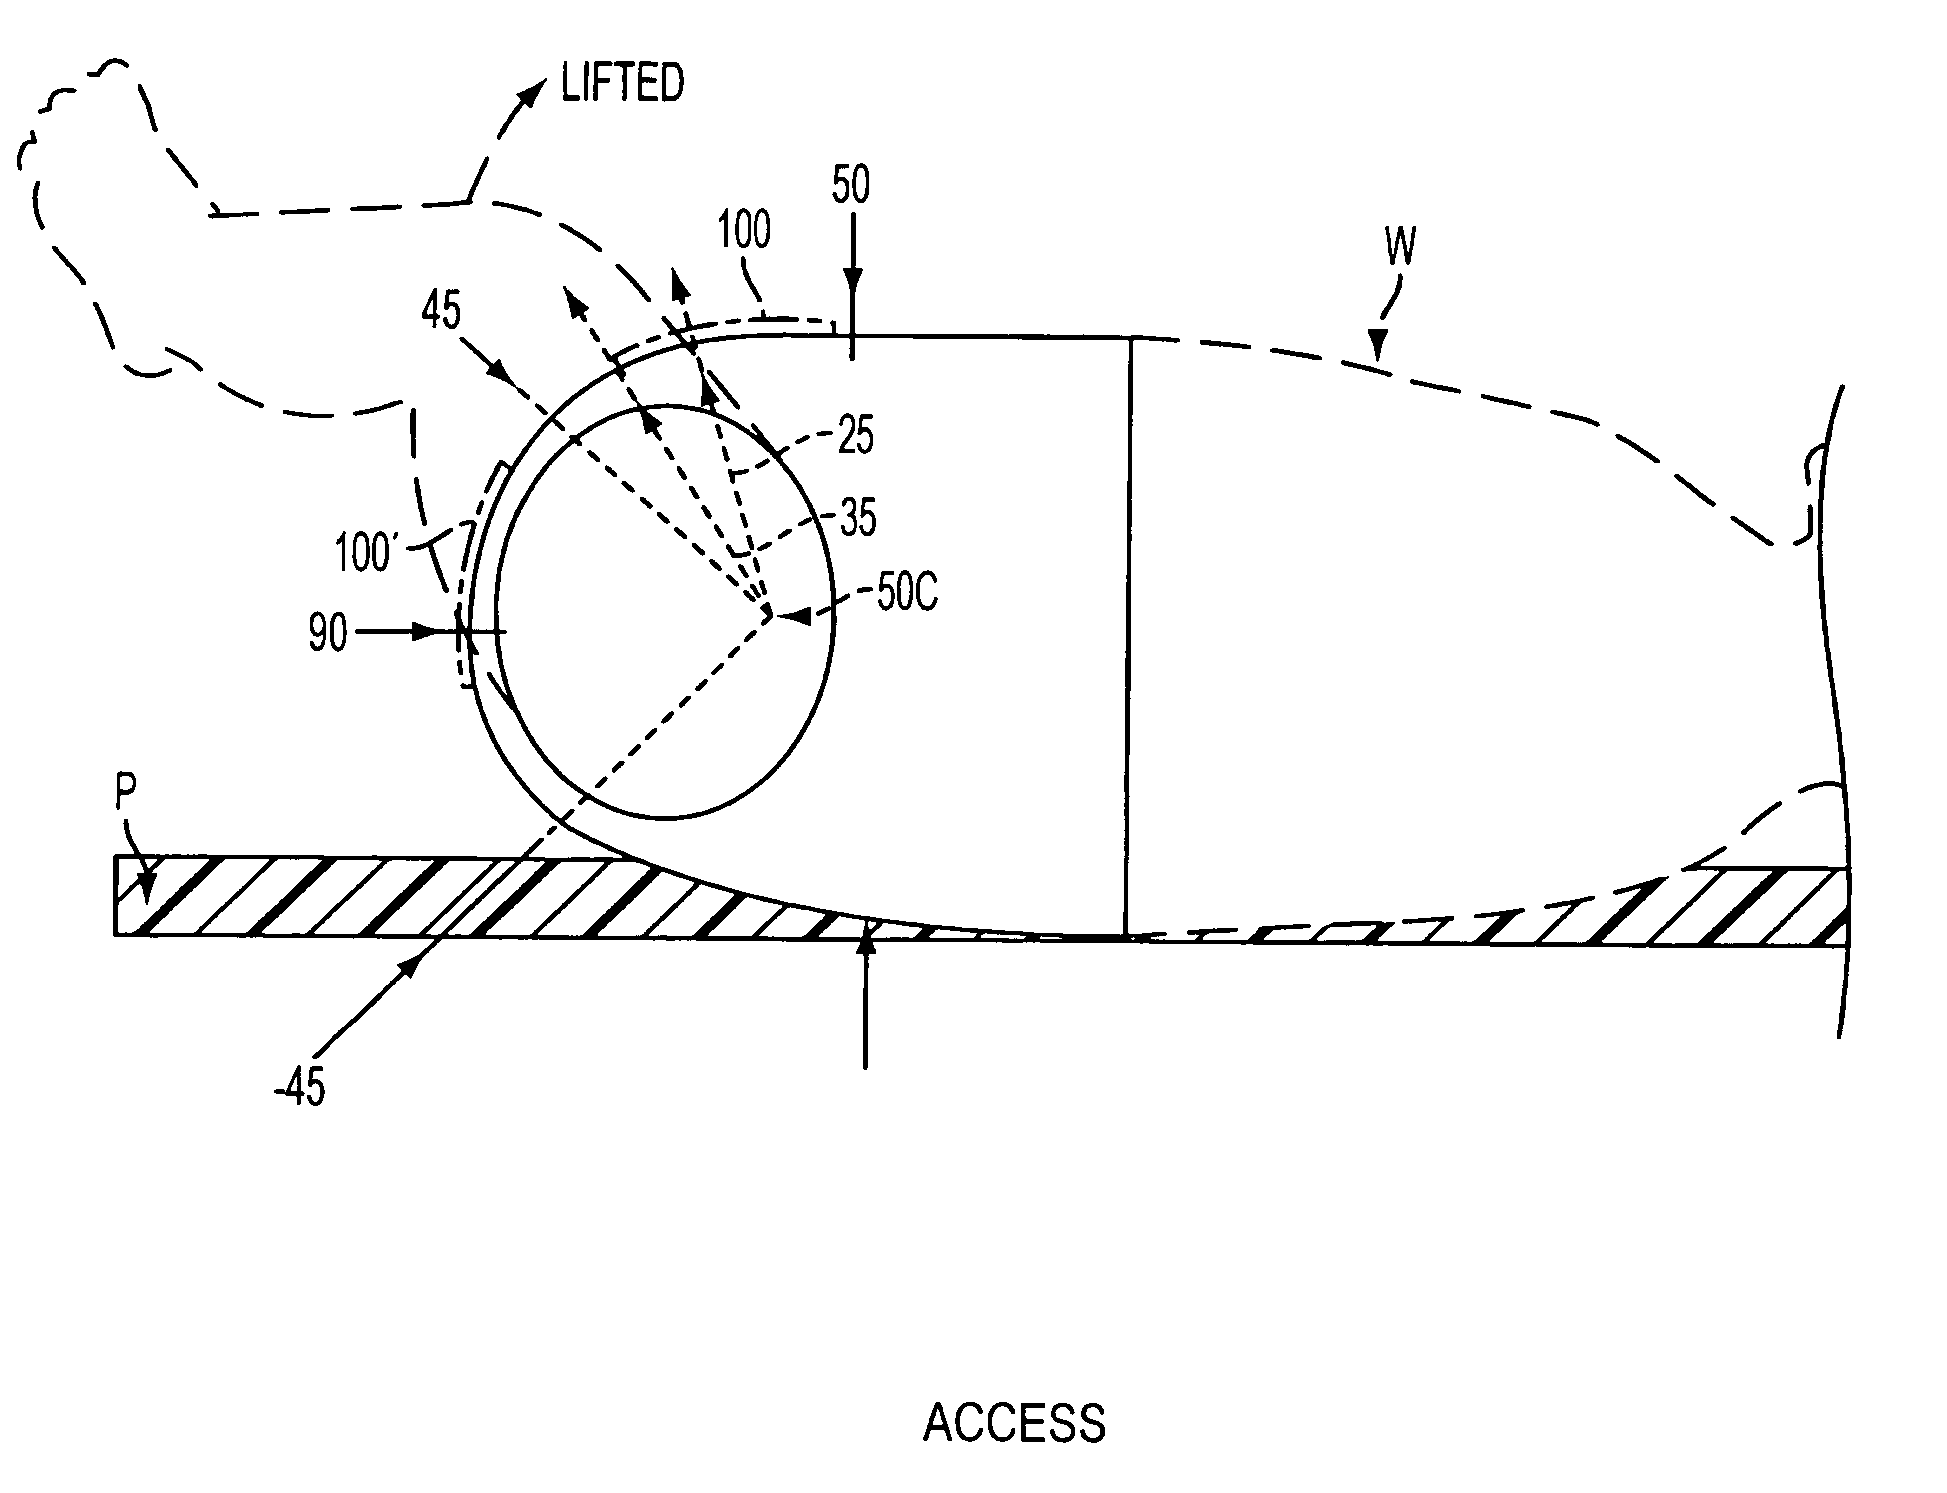 Method and apparatus for warming accessories for diapers and the like